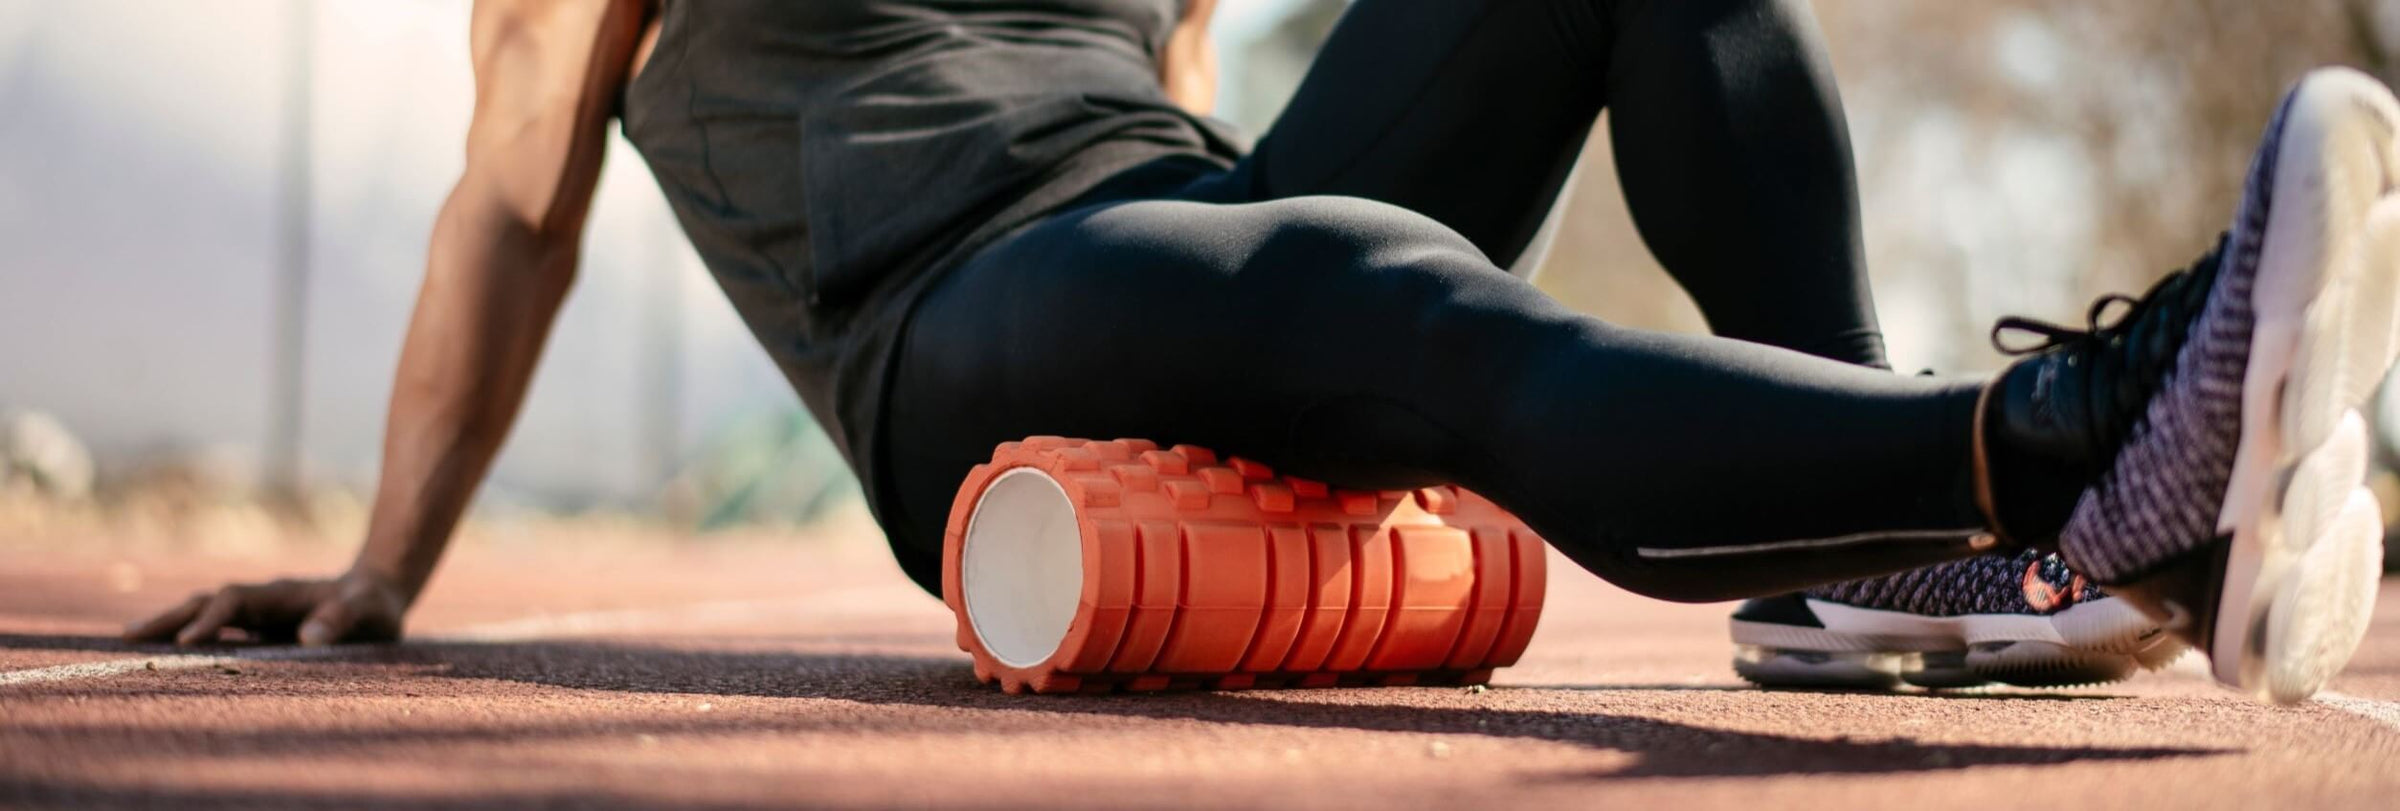 Young man doing an exercise with foam roller on her right leg